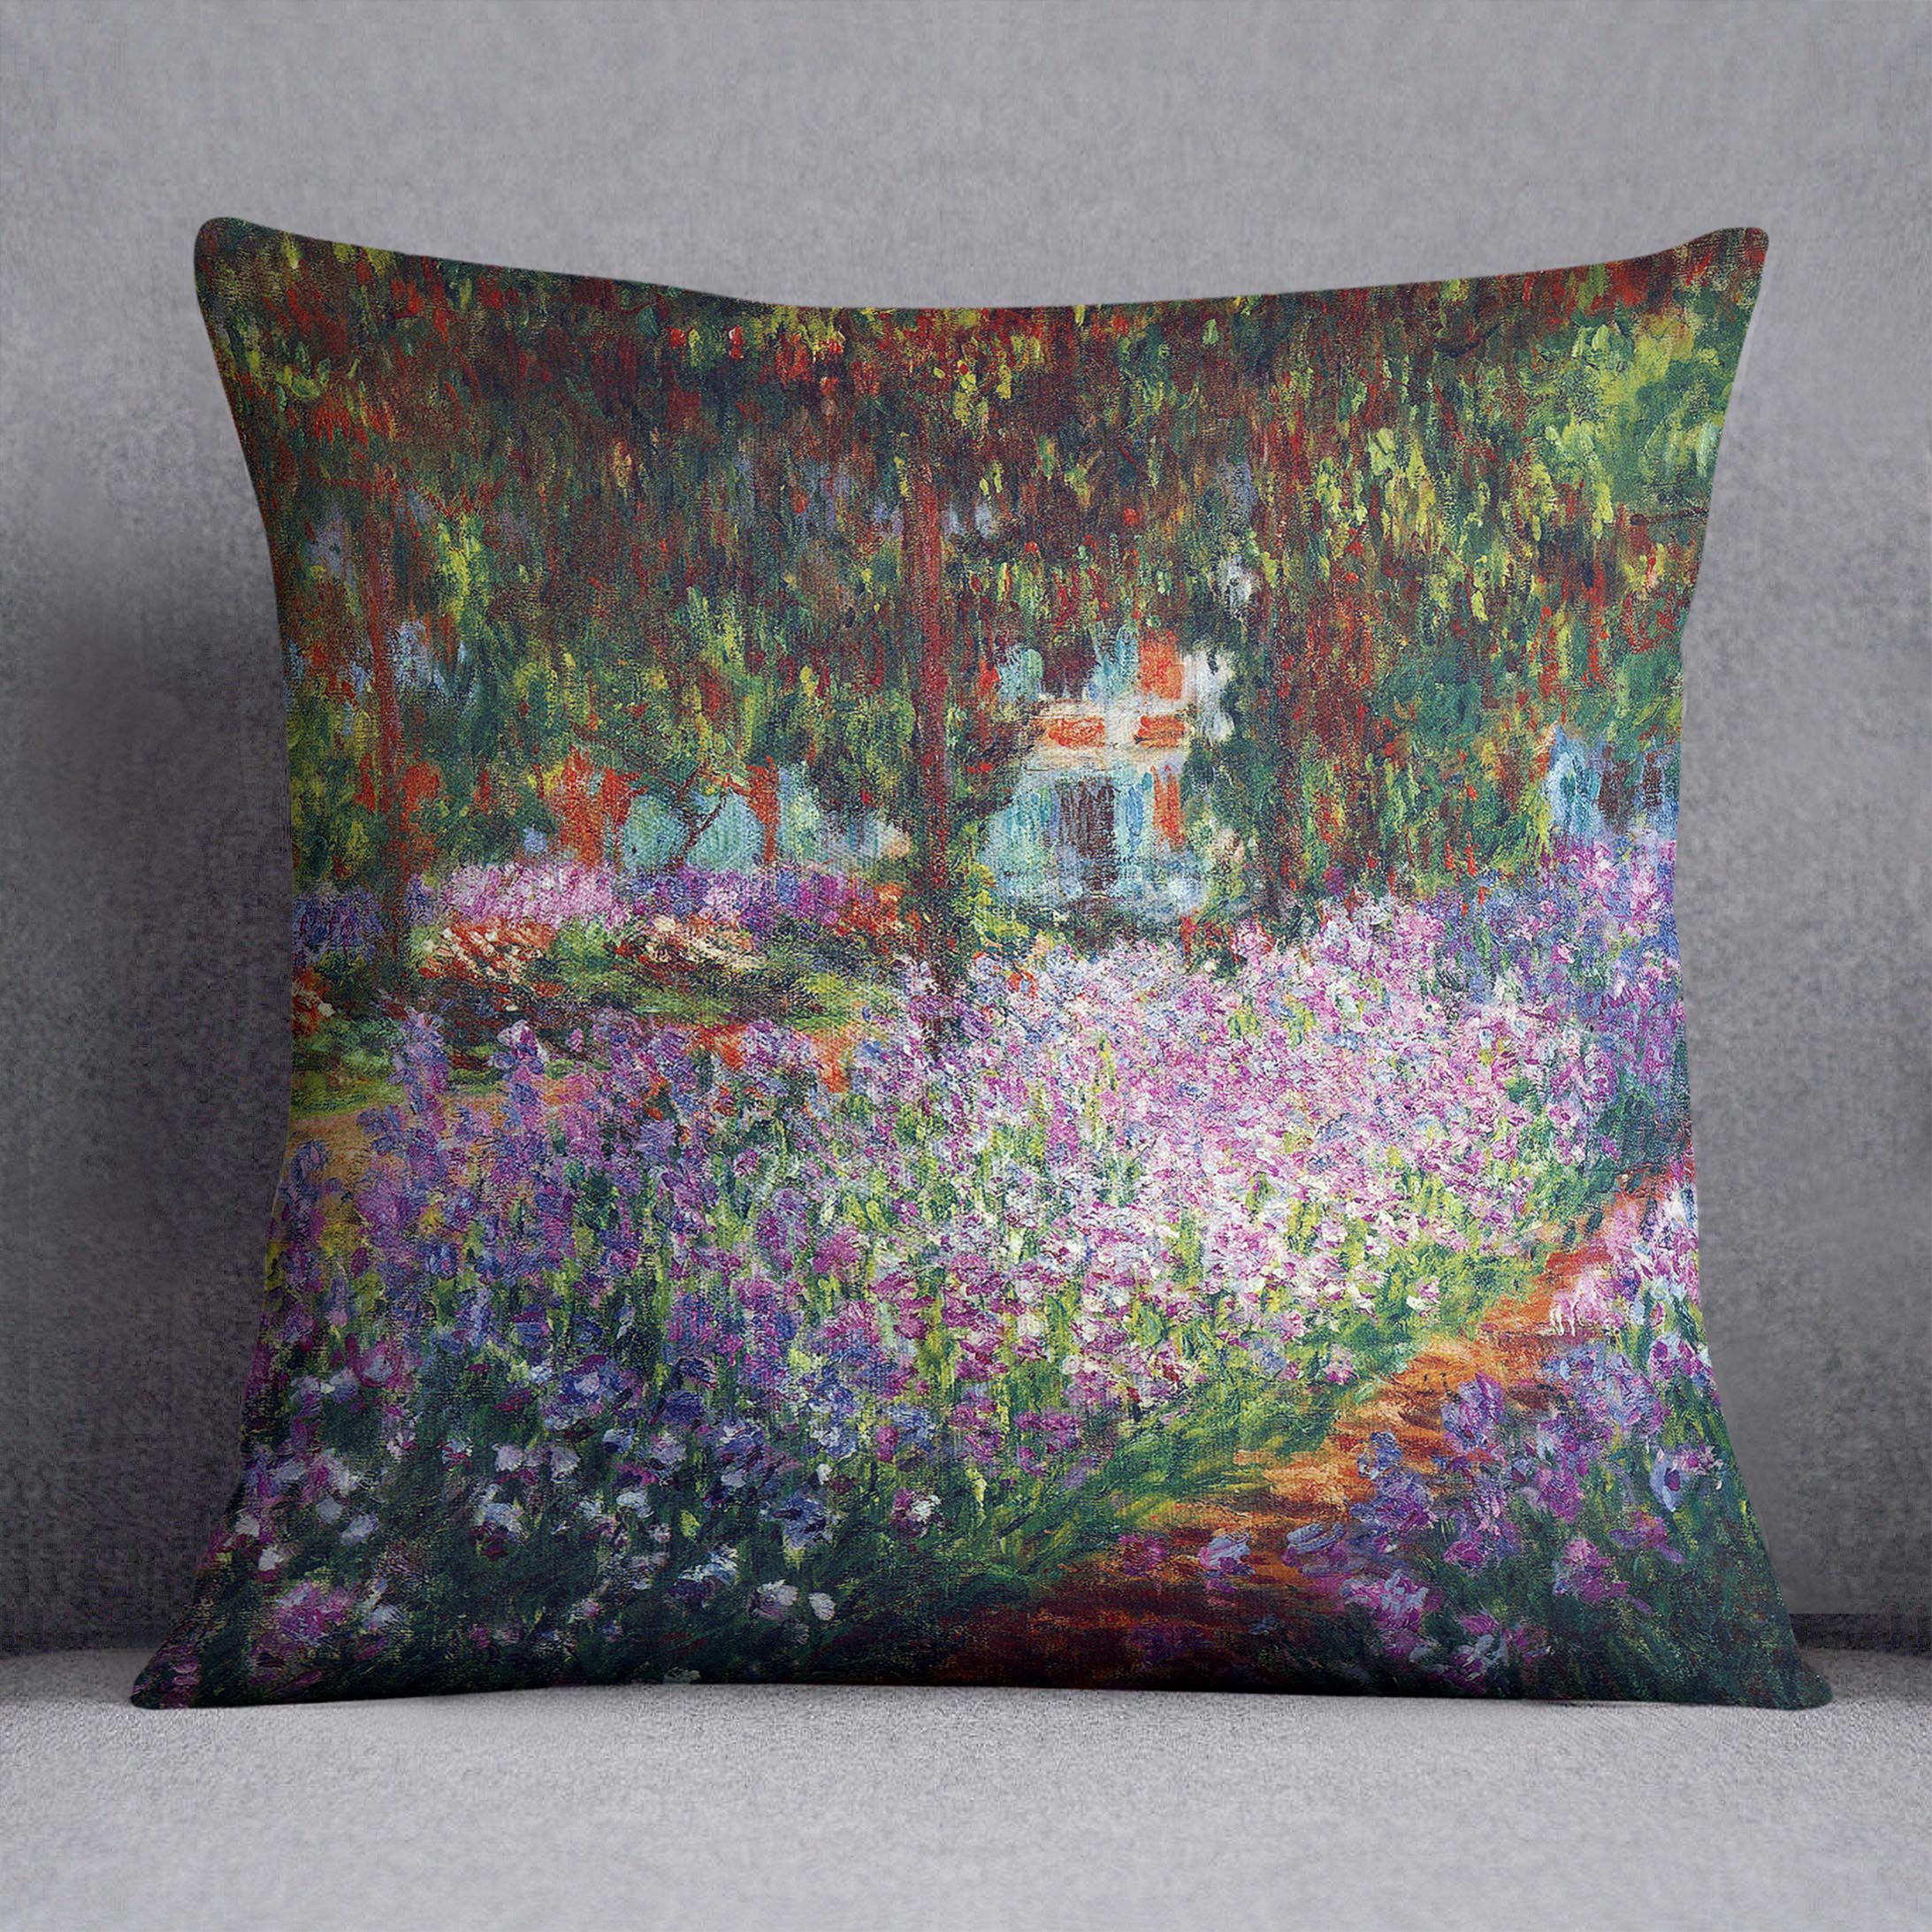 Monet's garden in Giverny by Monet Cushion